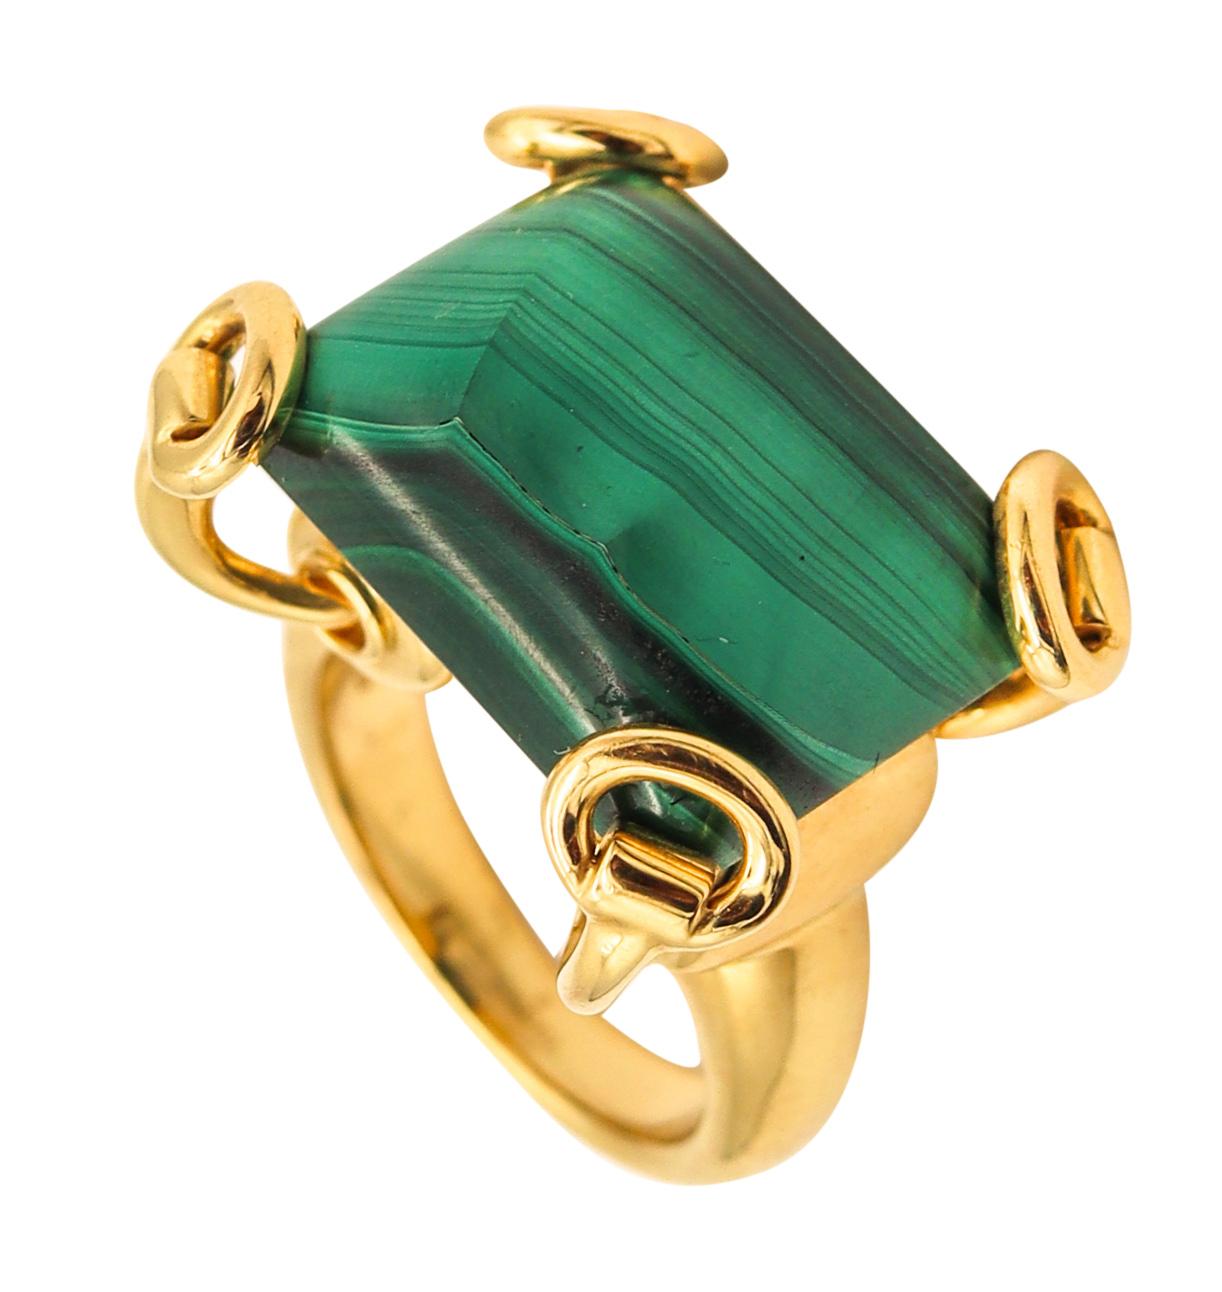 Gucci Milano Horsebit Cocktail Ring In 18Kt Yellow Gold with 26.65 Cts Malachite For Sale 3